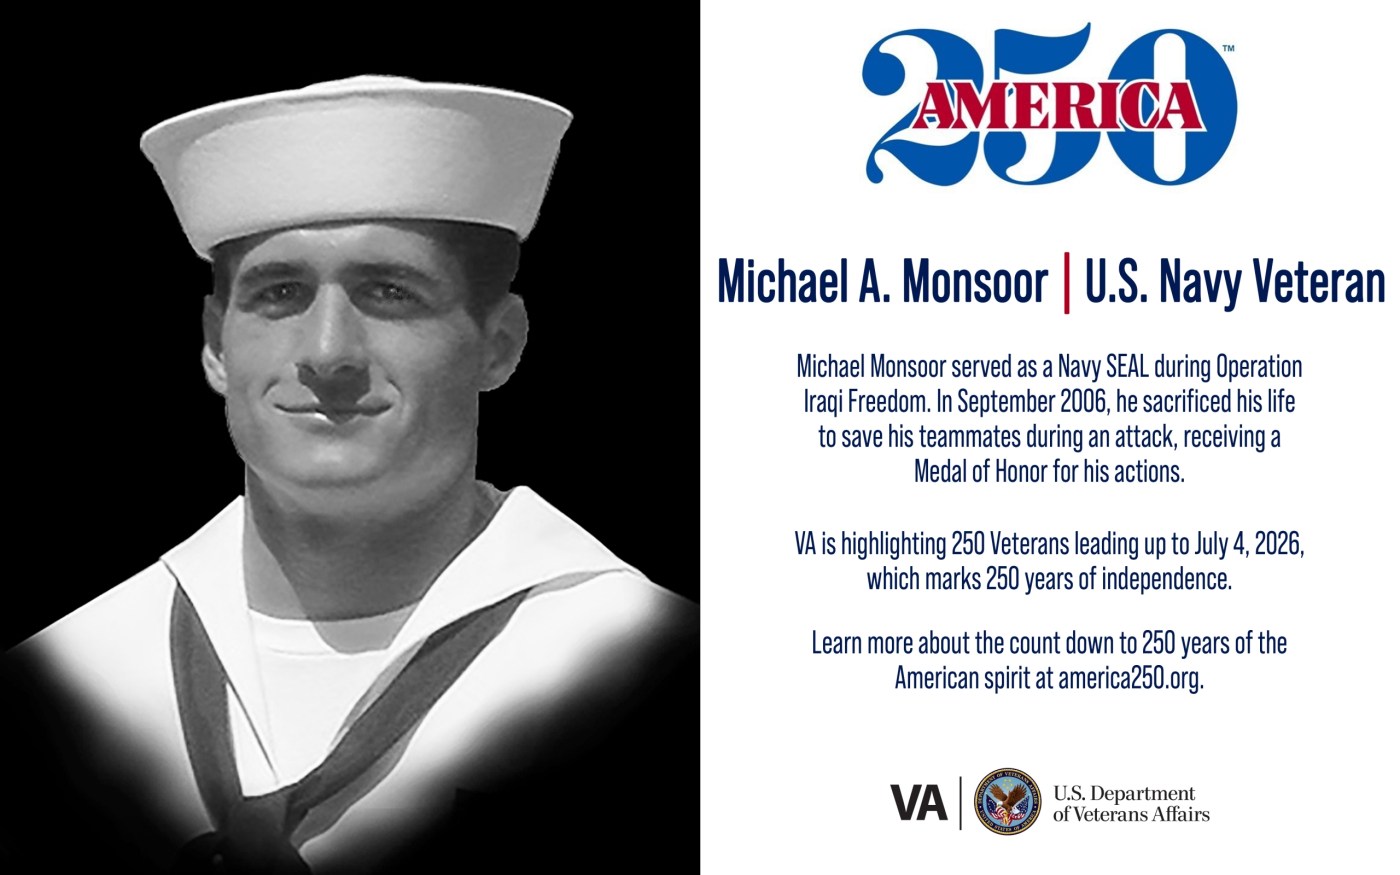 This week’s America250 salute is Navy Veteran Michael Monsoor who served as a SEAL during Operation Iraqi Freedom and posthumously received a Medal of Honor.